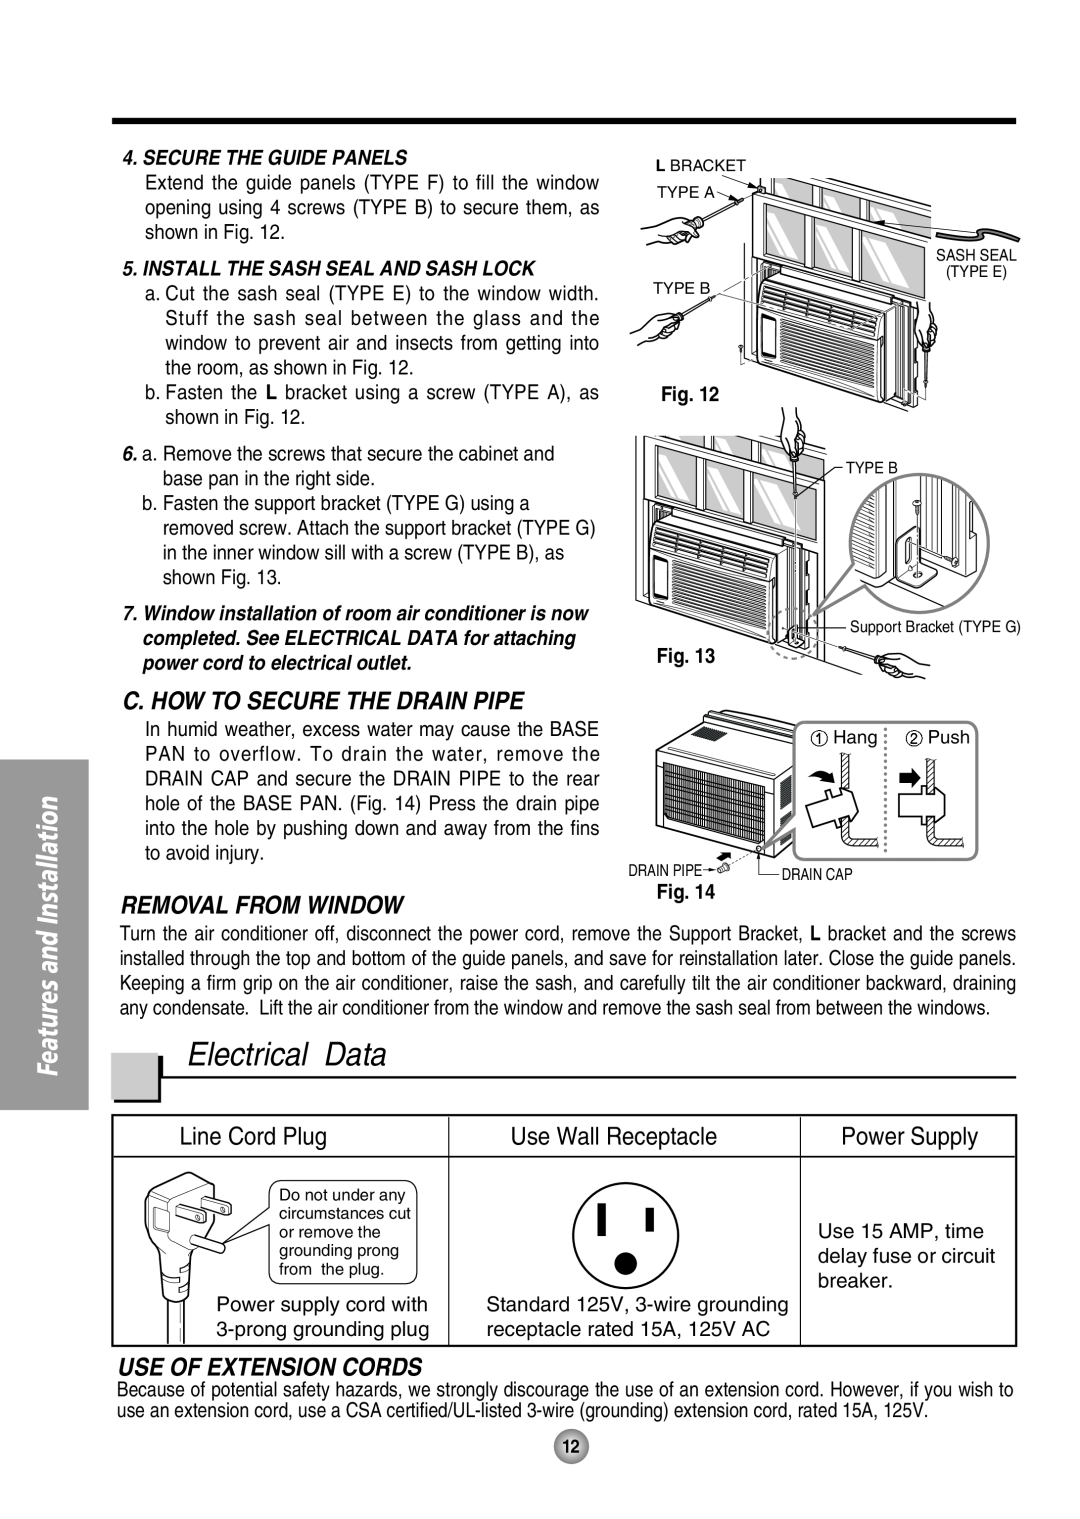 Panasonic CW-XC54HU Electrical Data, C. How To Secure The Drain Pipe, Removal From Window, Line Cord Plug, Power Supply 